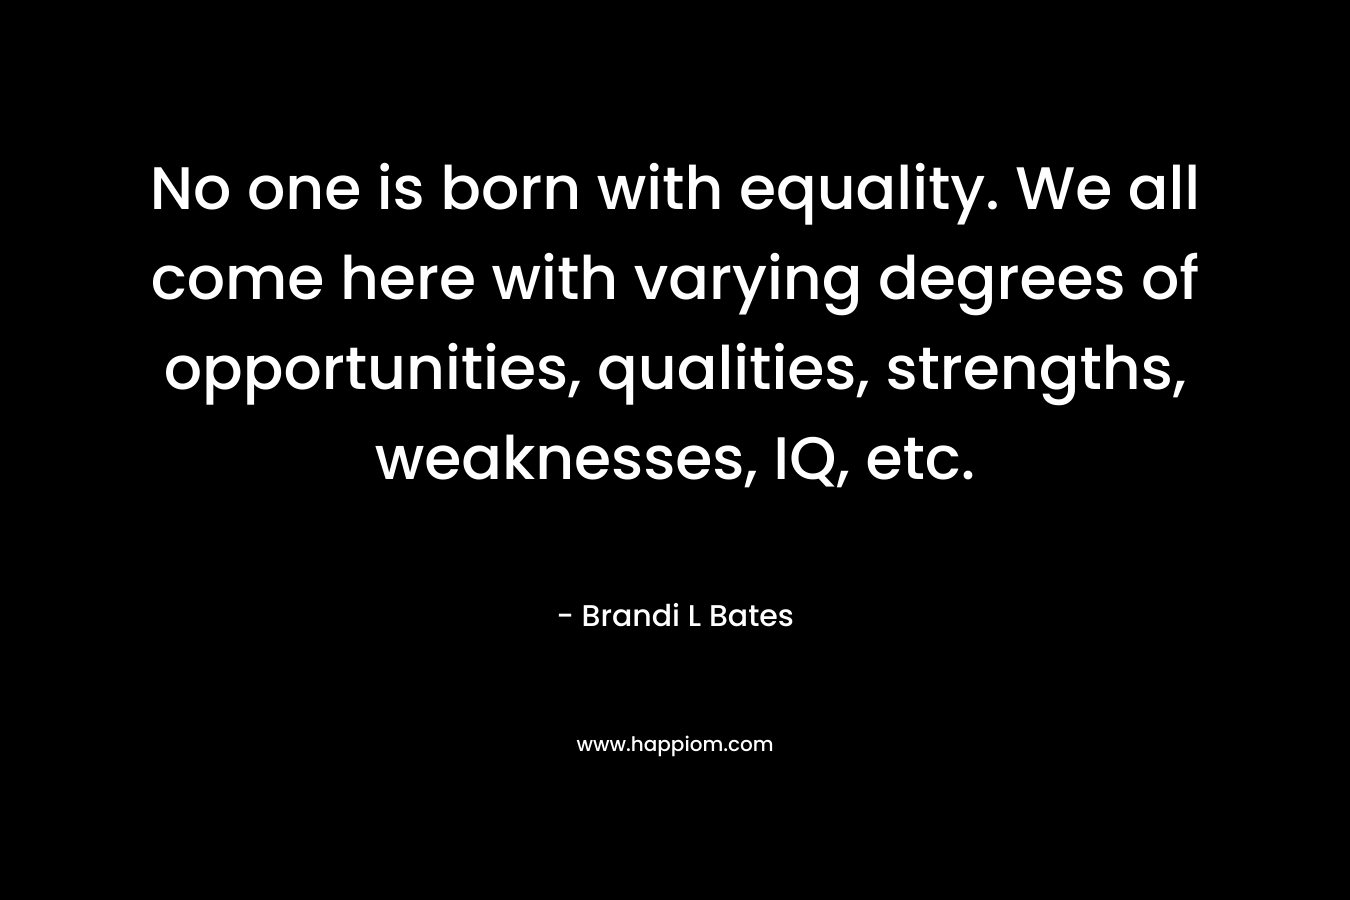 No one is born with equality. We all come here with varying degrees of opportunities, qualities, strengths, weaknesses, IQ, etc.